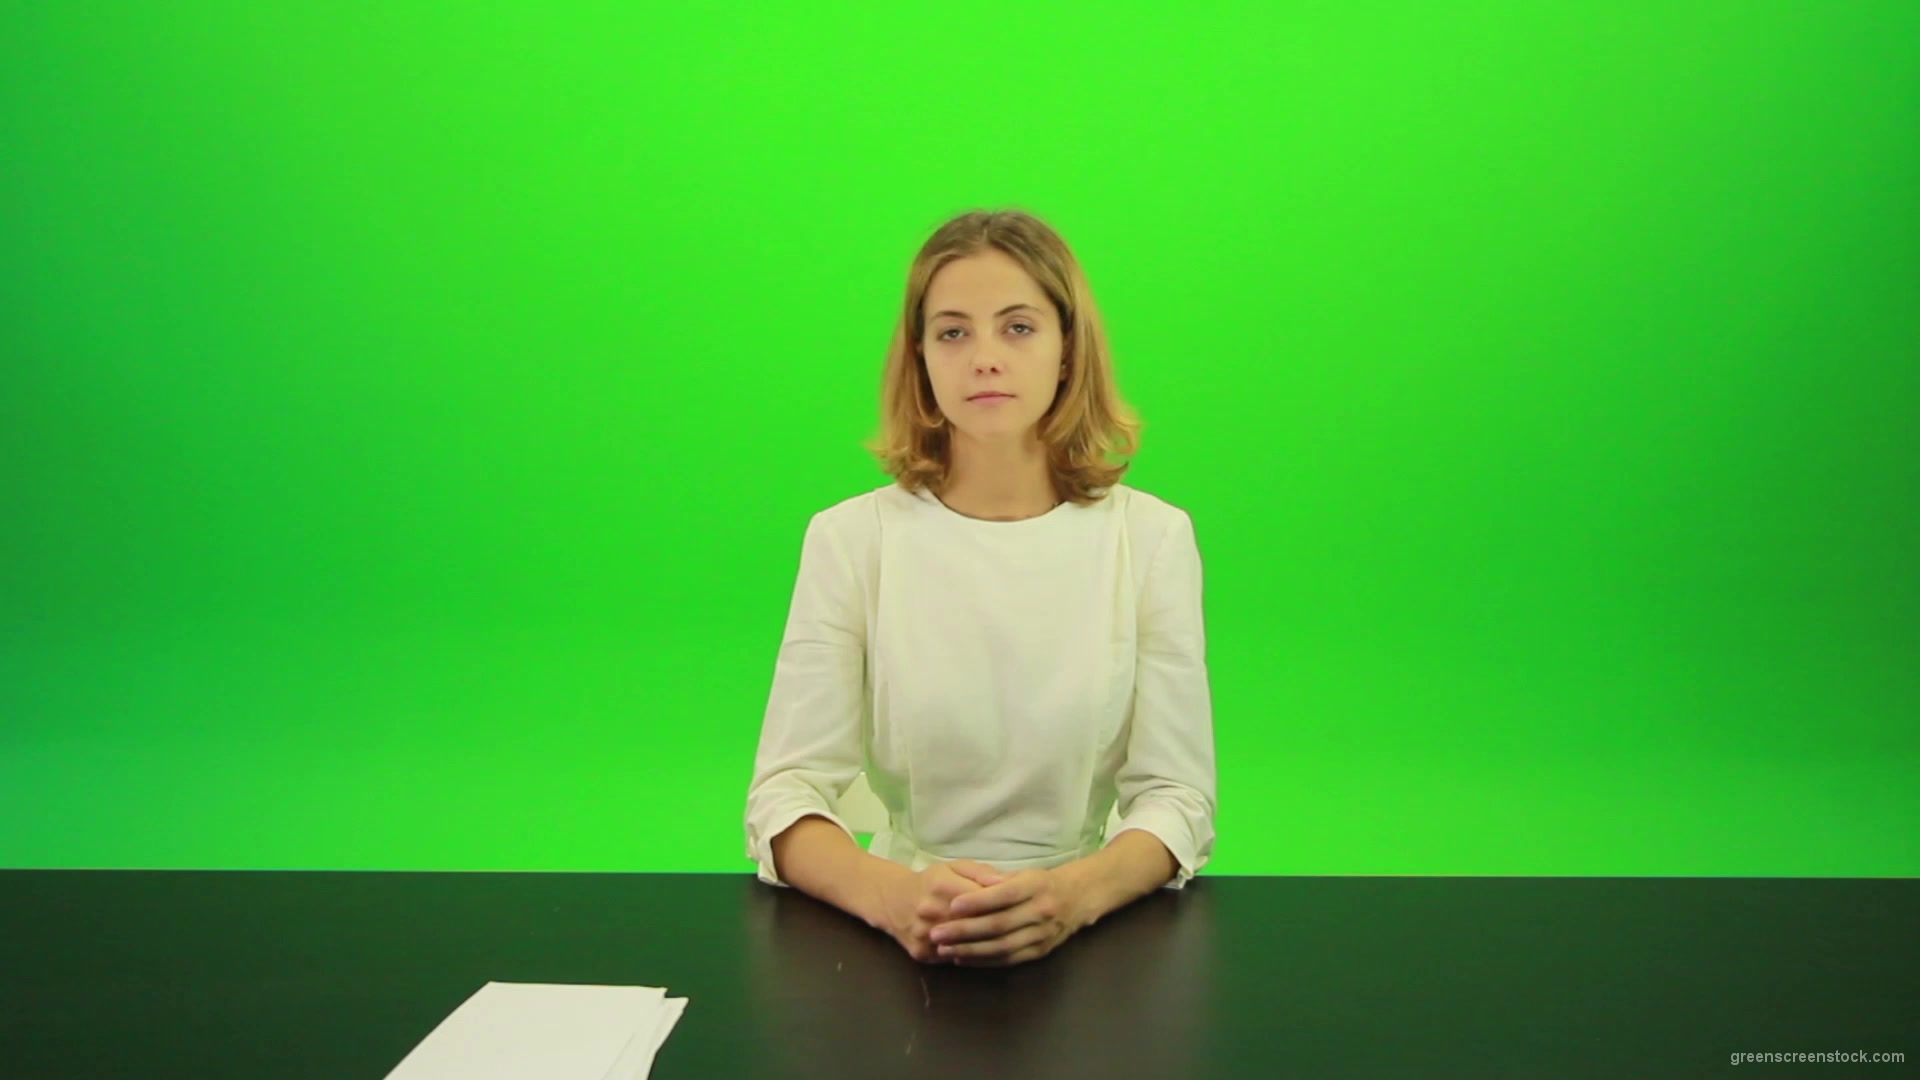 Blonde-girl-adult-gives-1-one-point-mark-score-Full-HD-Green-Screen-Video-Footage_001 Green Screen Stock